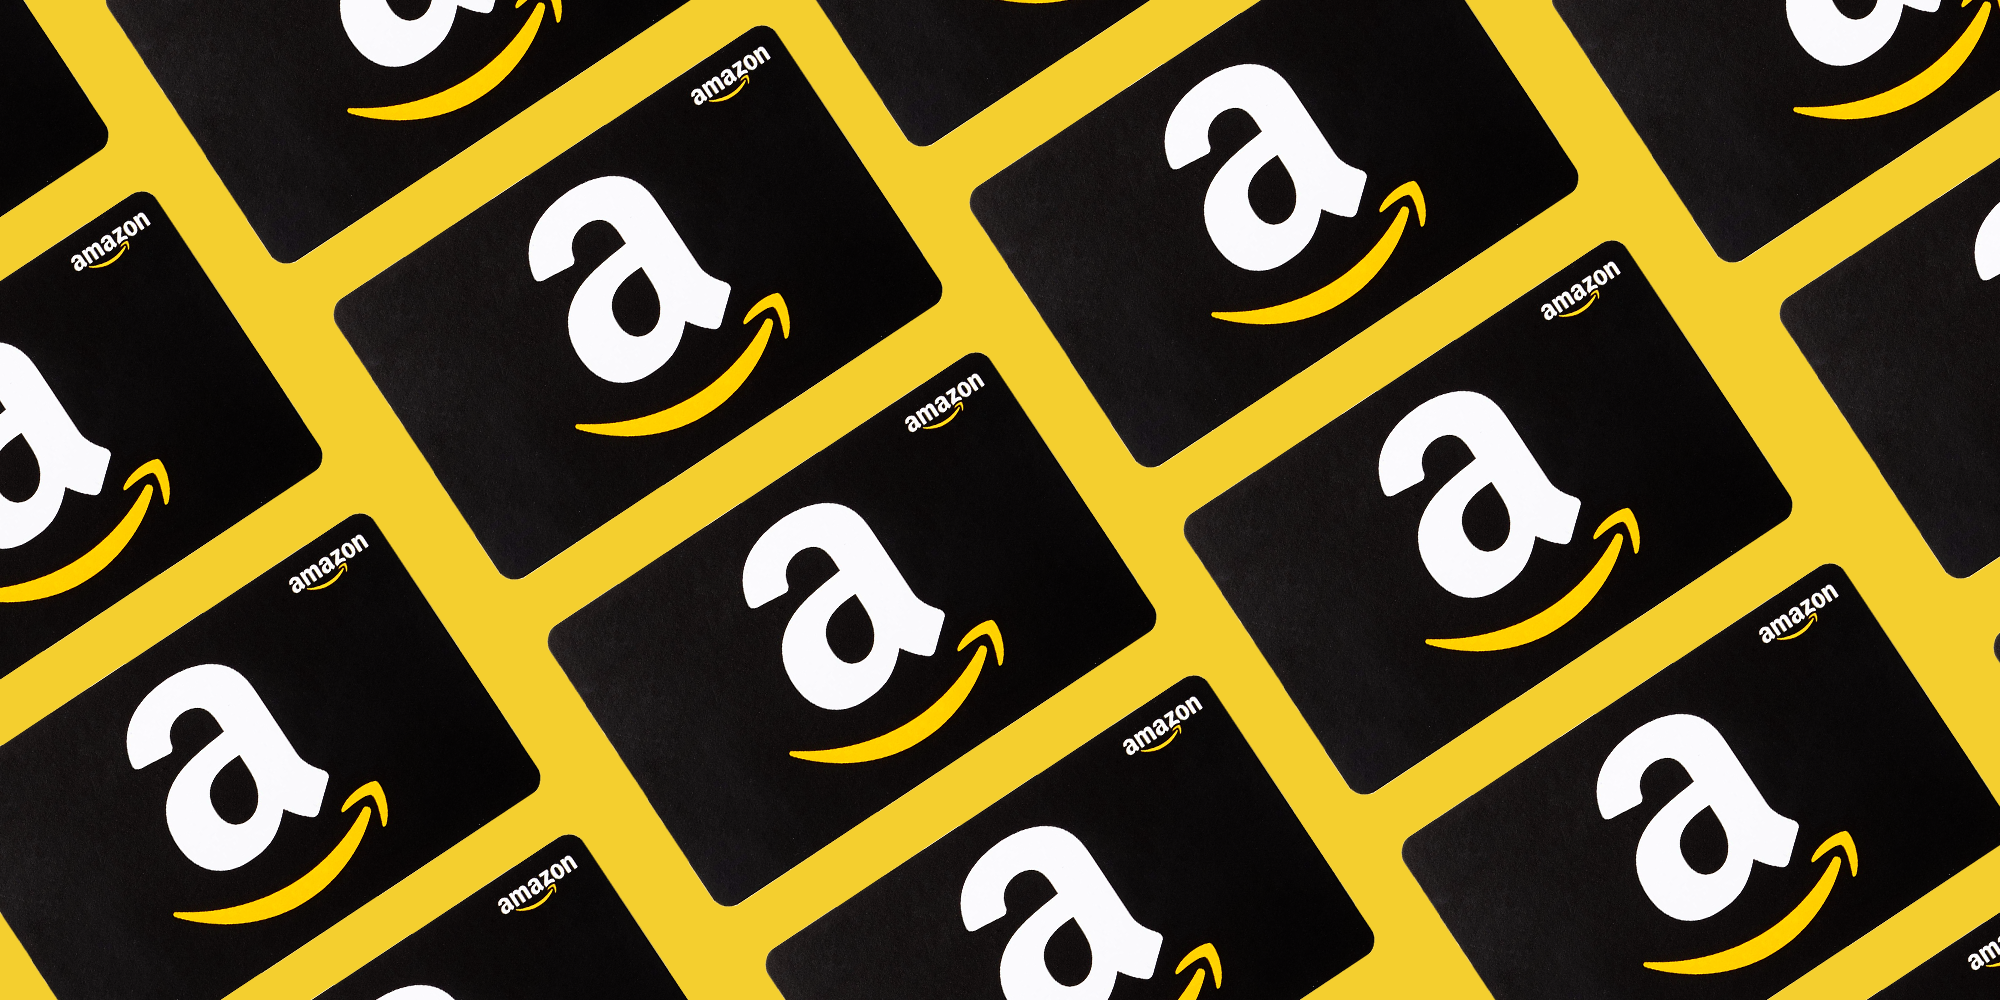 Where Are Amazon Gift Cards Sold?